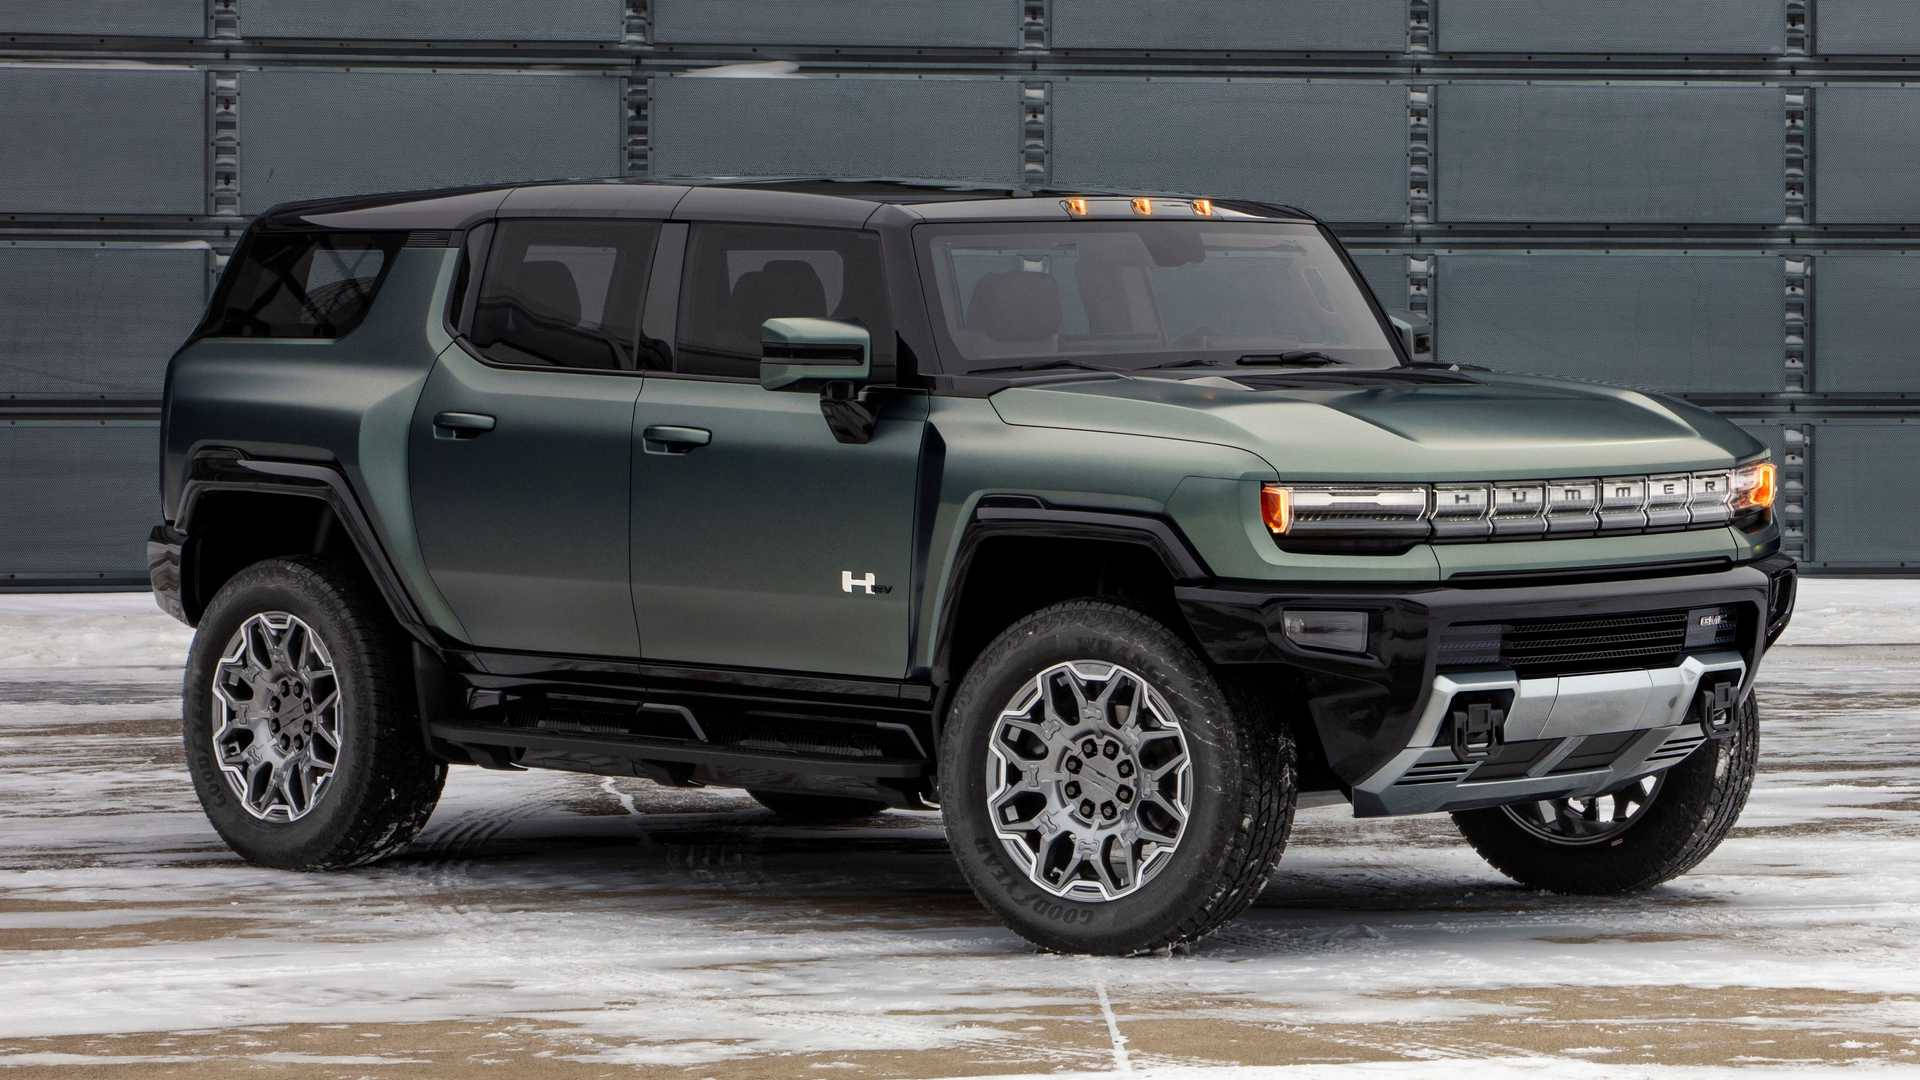 Five-Seater Hummer SUV Wallpaper